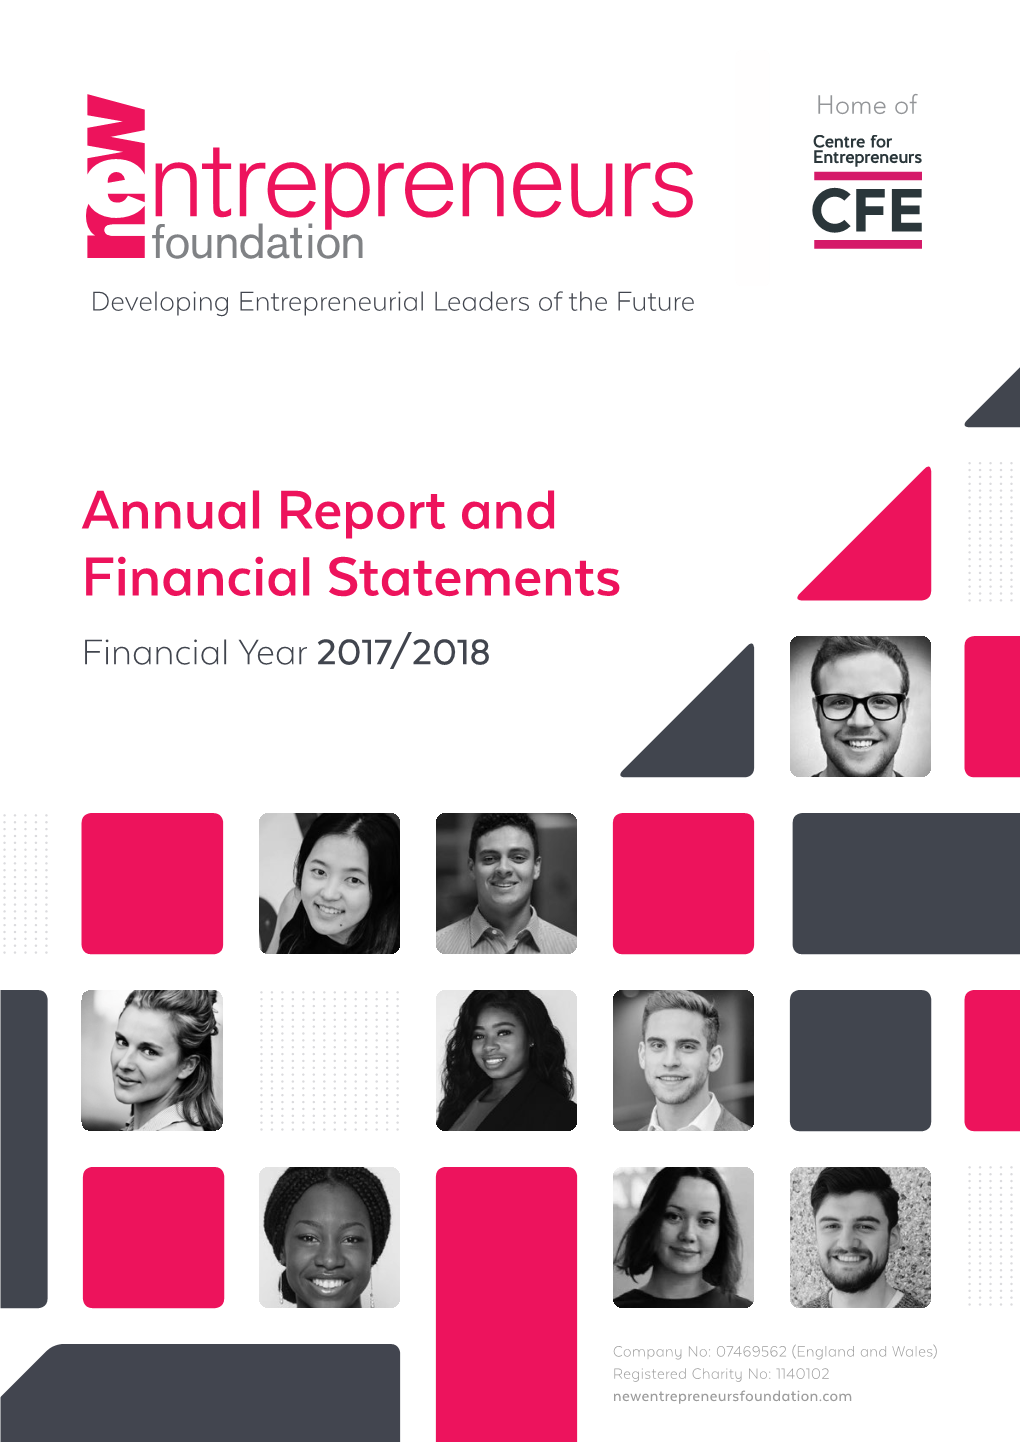 Annual Report and Financial Statements Financial Year 2017/2018